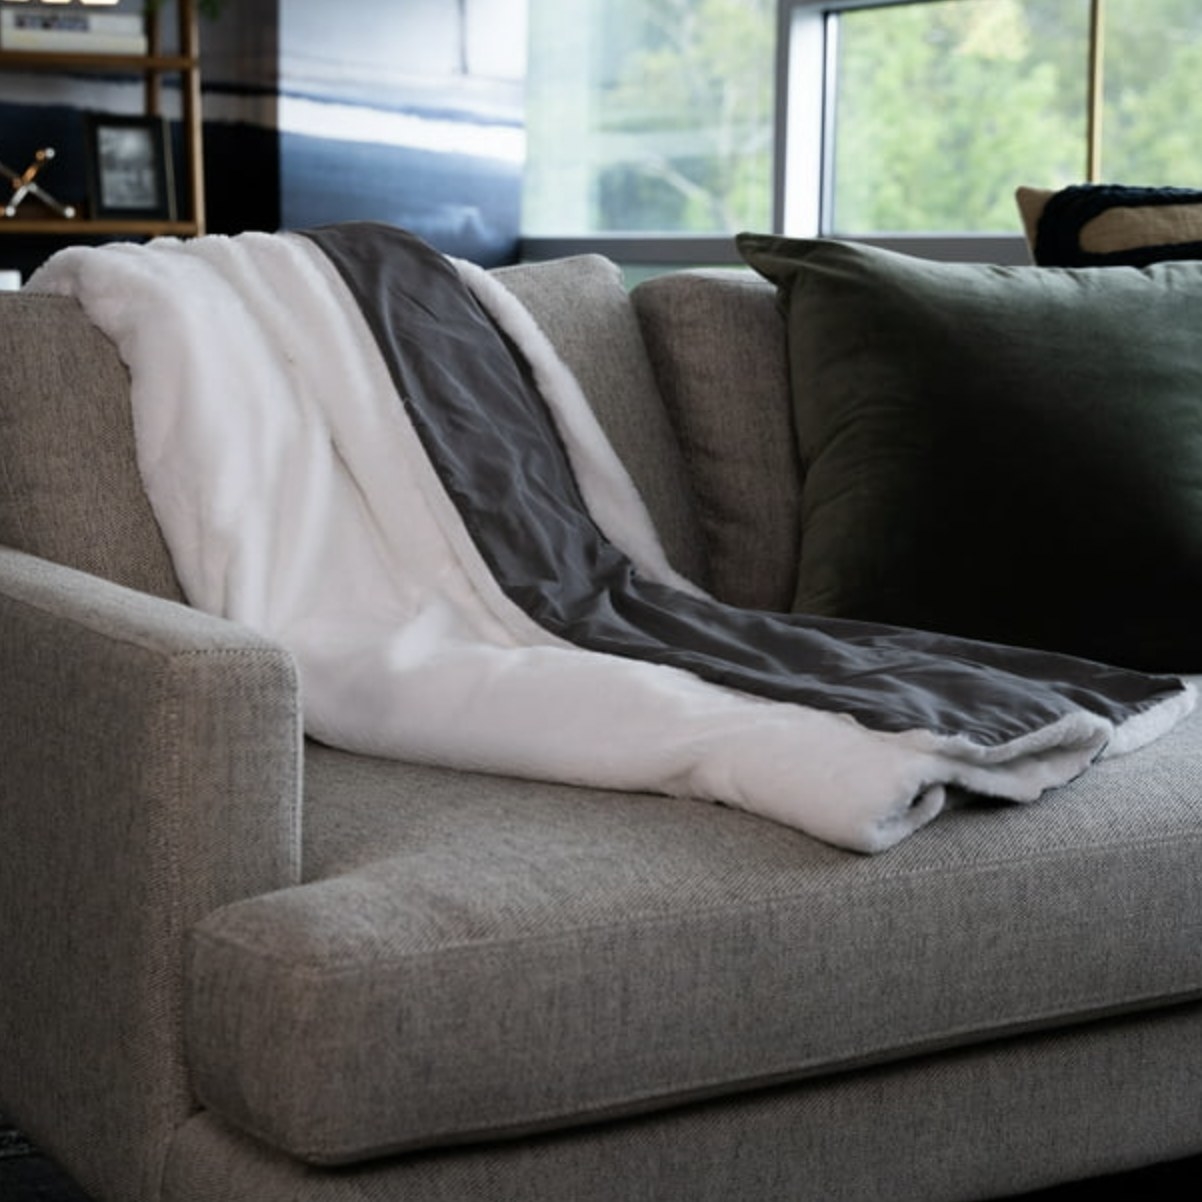 The grey/white blanket draped on couch